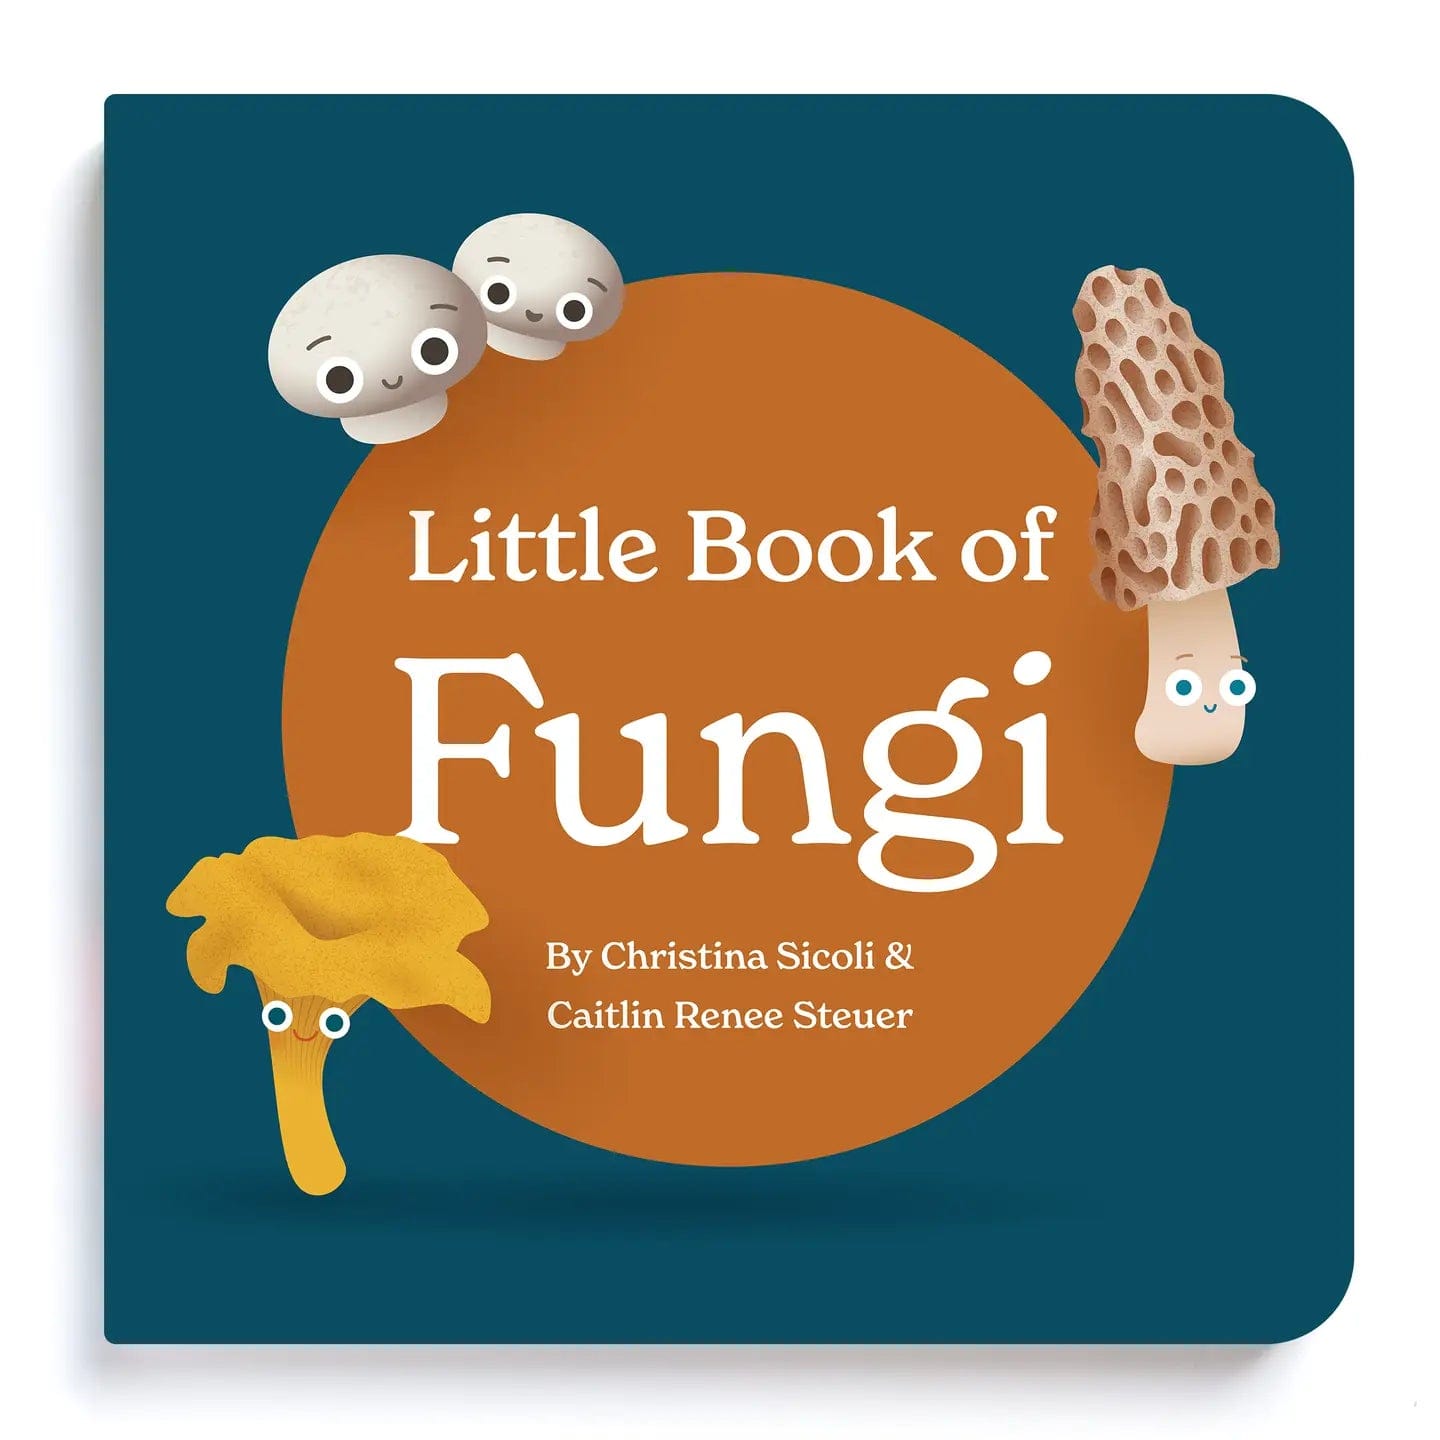 Little Book Of Fungi by Chunky Deli